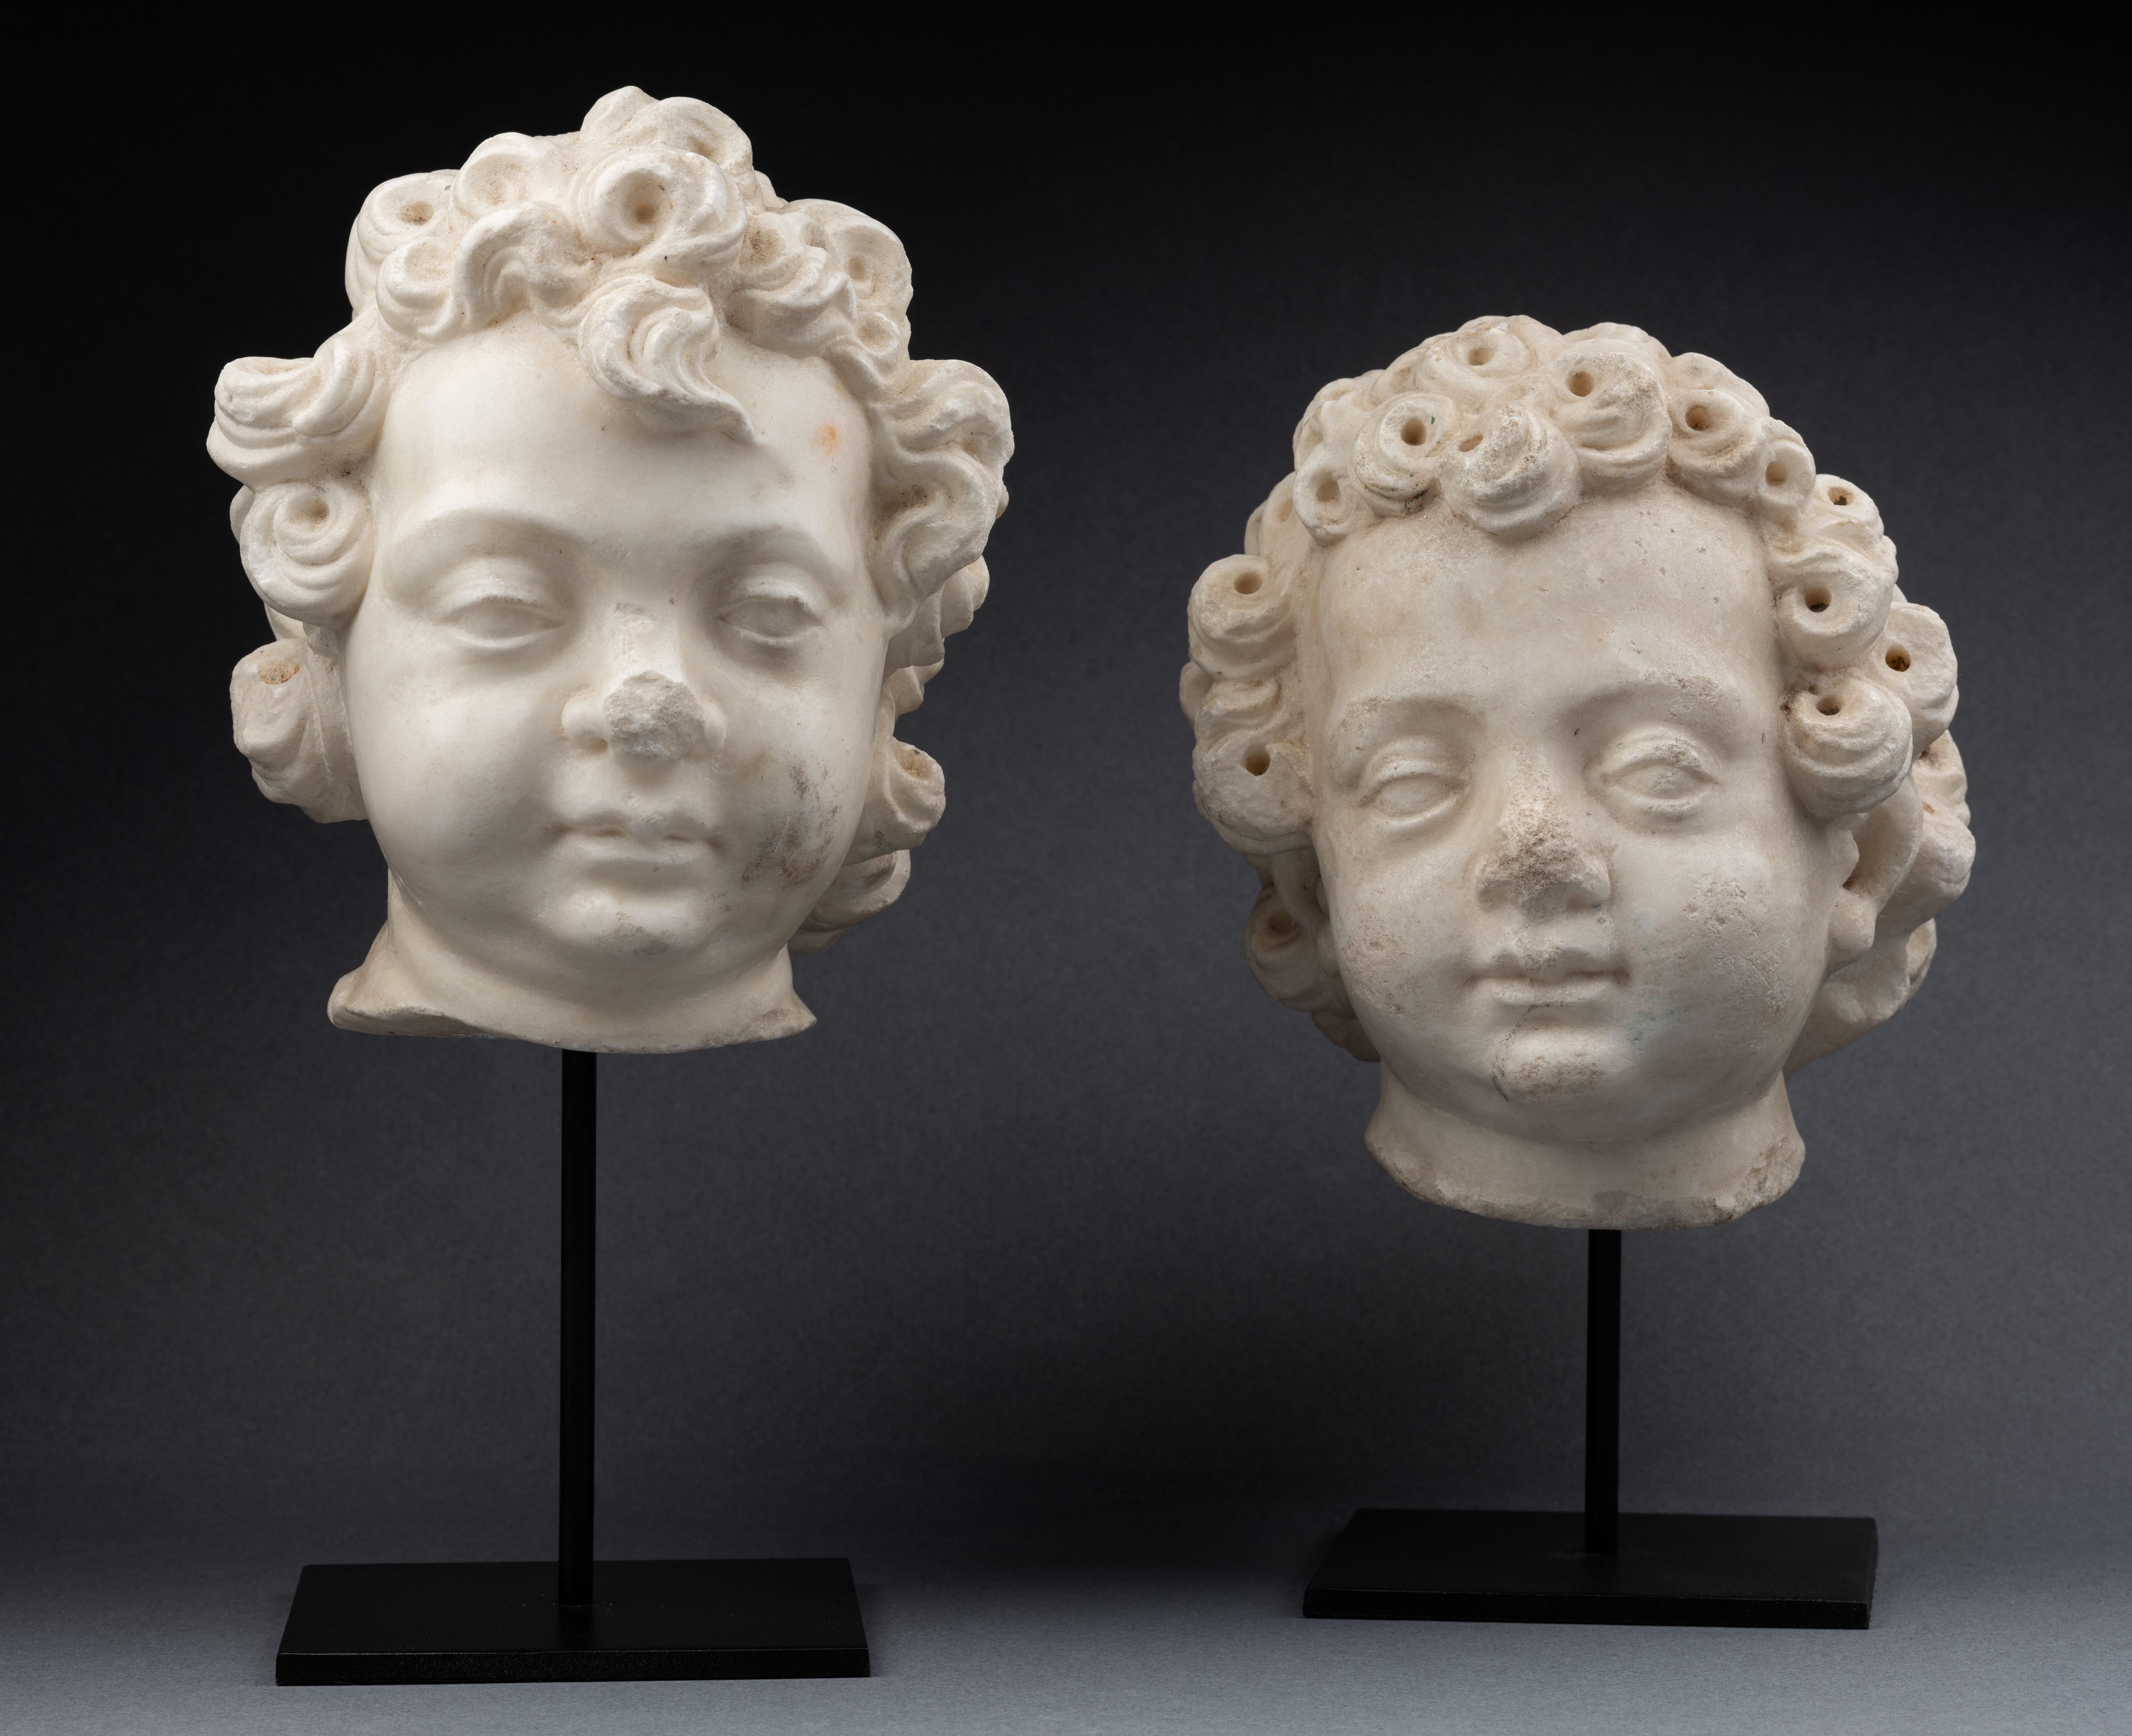 A 16th century Renaissance North Italian marble heads of two puttis - Gray Figurative Sculpture by Unknown